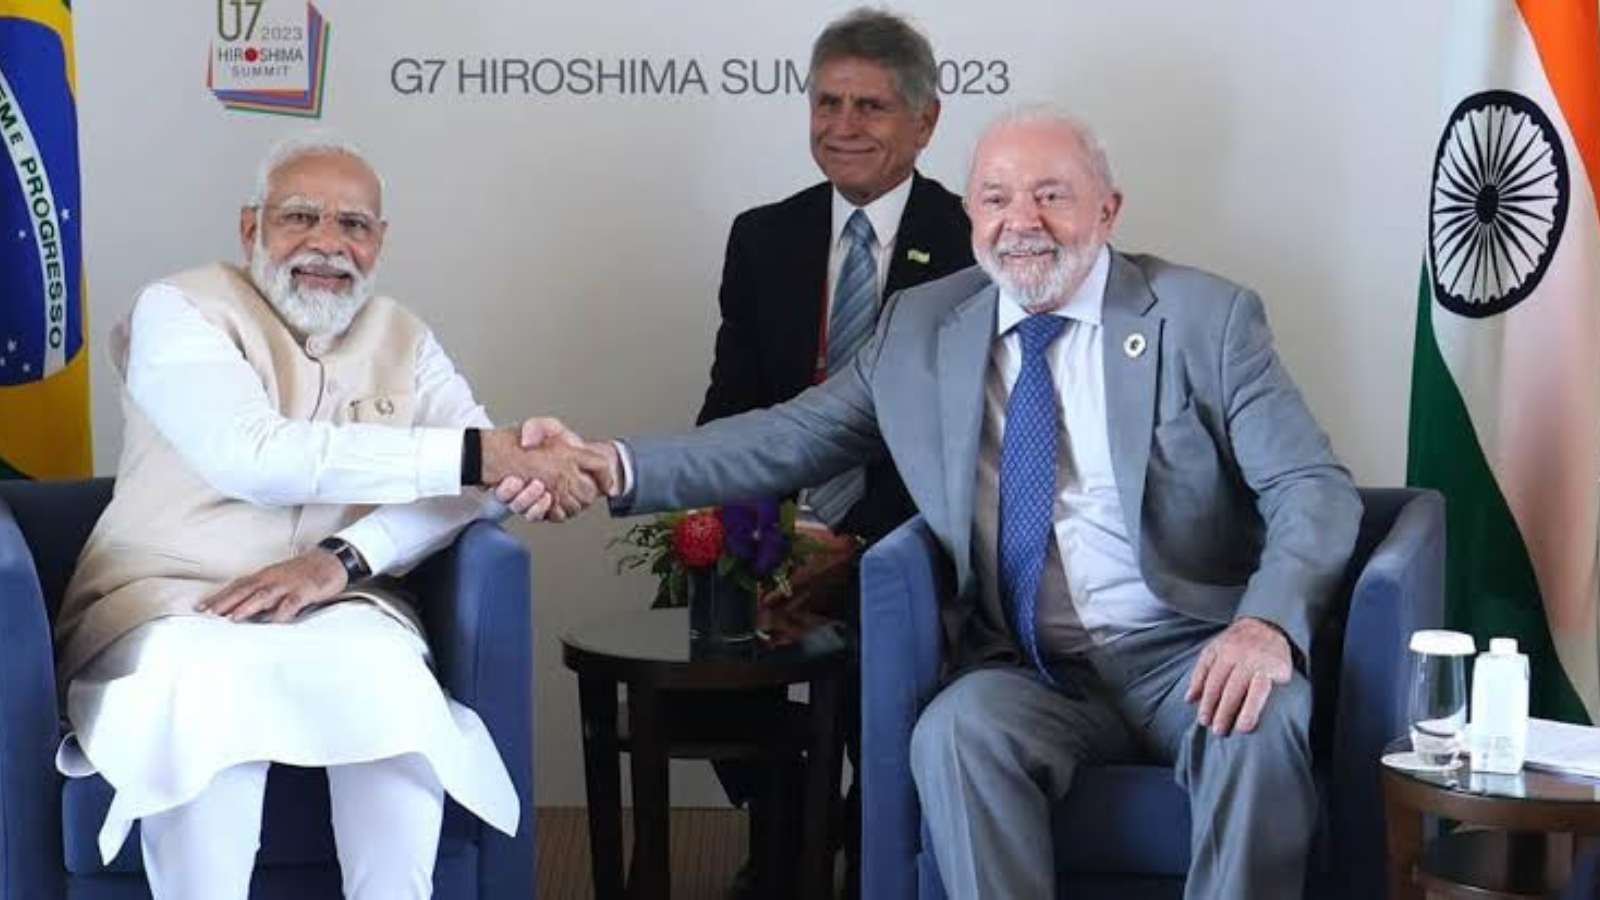 Brazil Partnership with India: All You Need To Know About G20 Summit Discussion